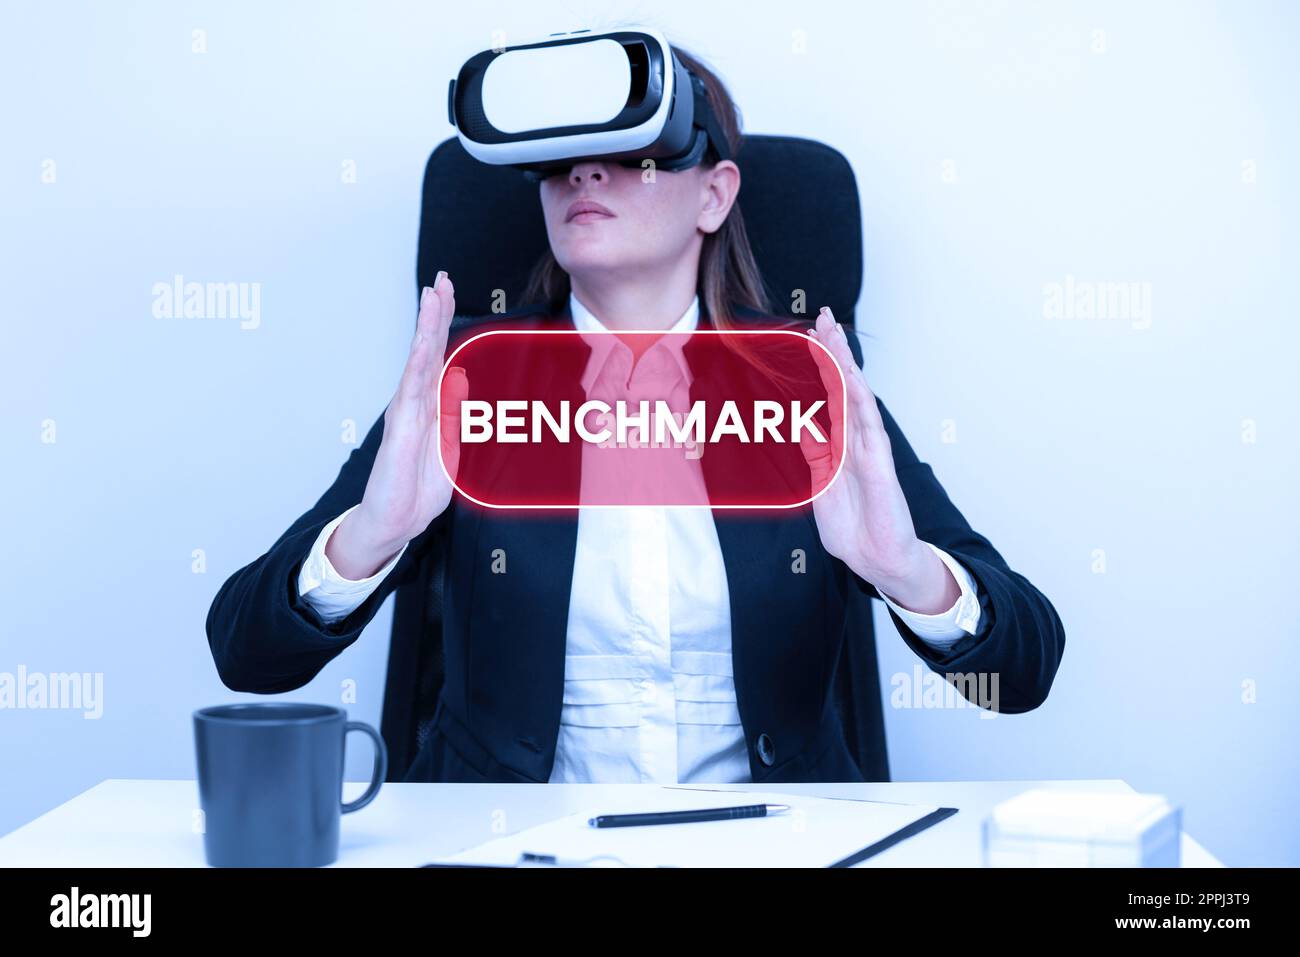 Sign displaying Benchmark. Business showcase using or able to use two languages especially with equal fluency Executive Gesturing And Learning Skill Through Virtual Reality Simulator. Stock Photo